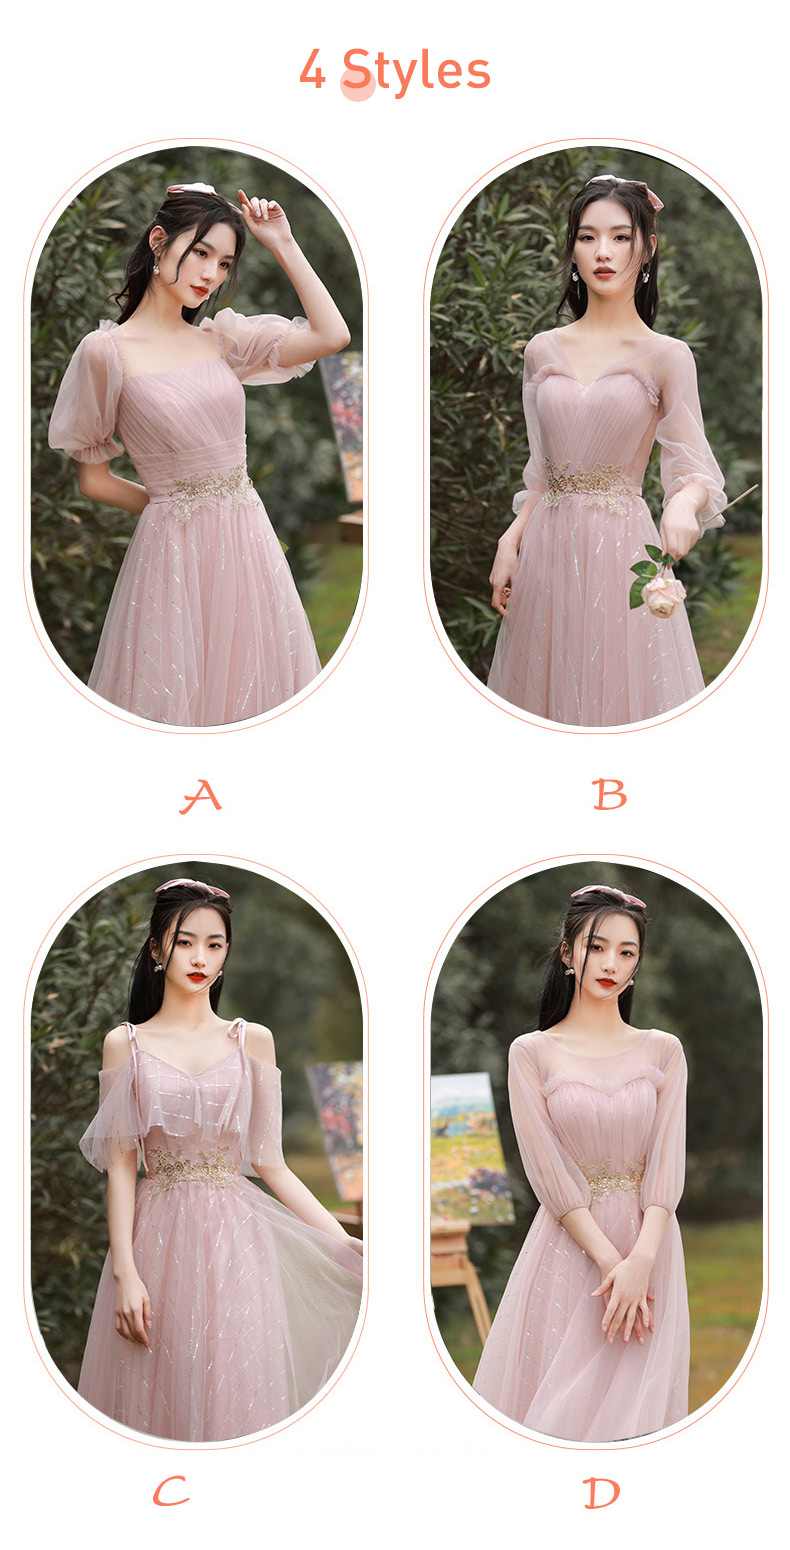 Fairy-Pink-Bridesmaid-Dress-with-Sleeves-Chiffon-Long-Casual-Gown13.jpg